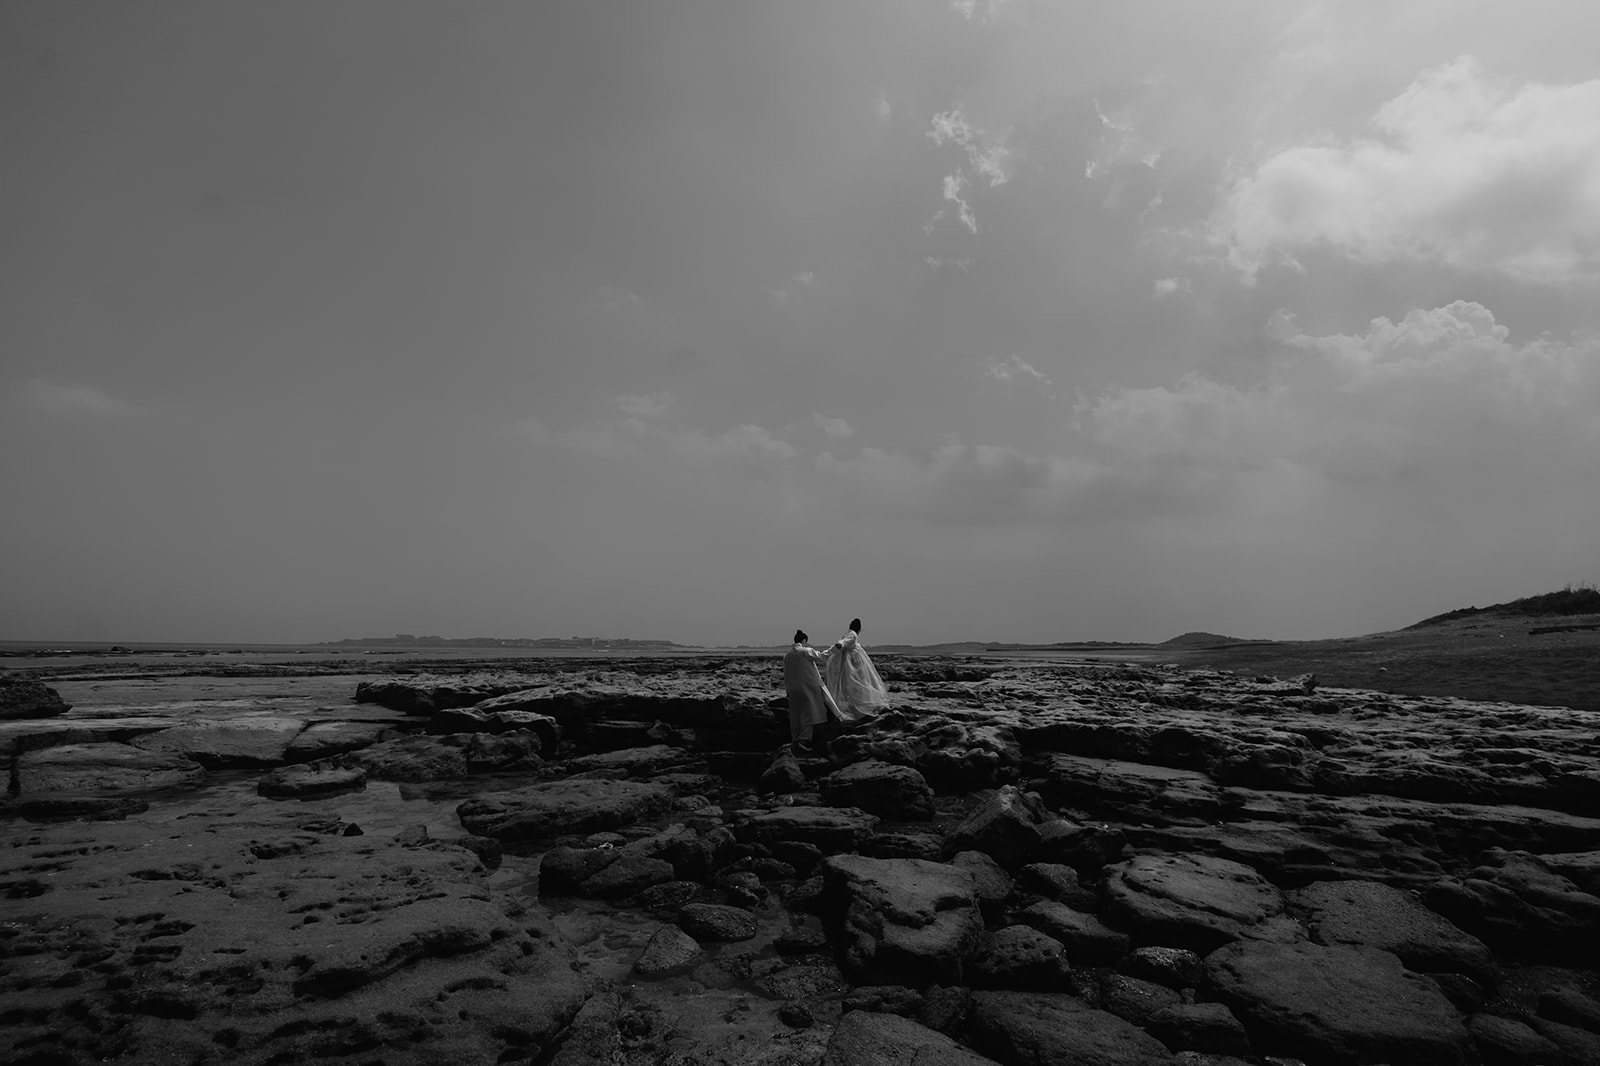 A pre-wedding photo of a couple walking on a rocky beach in Korea, captured in black and white.